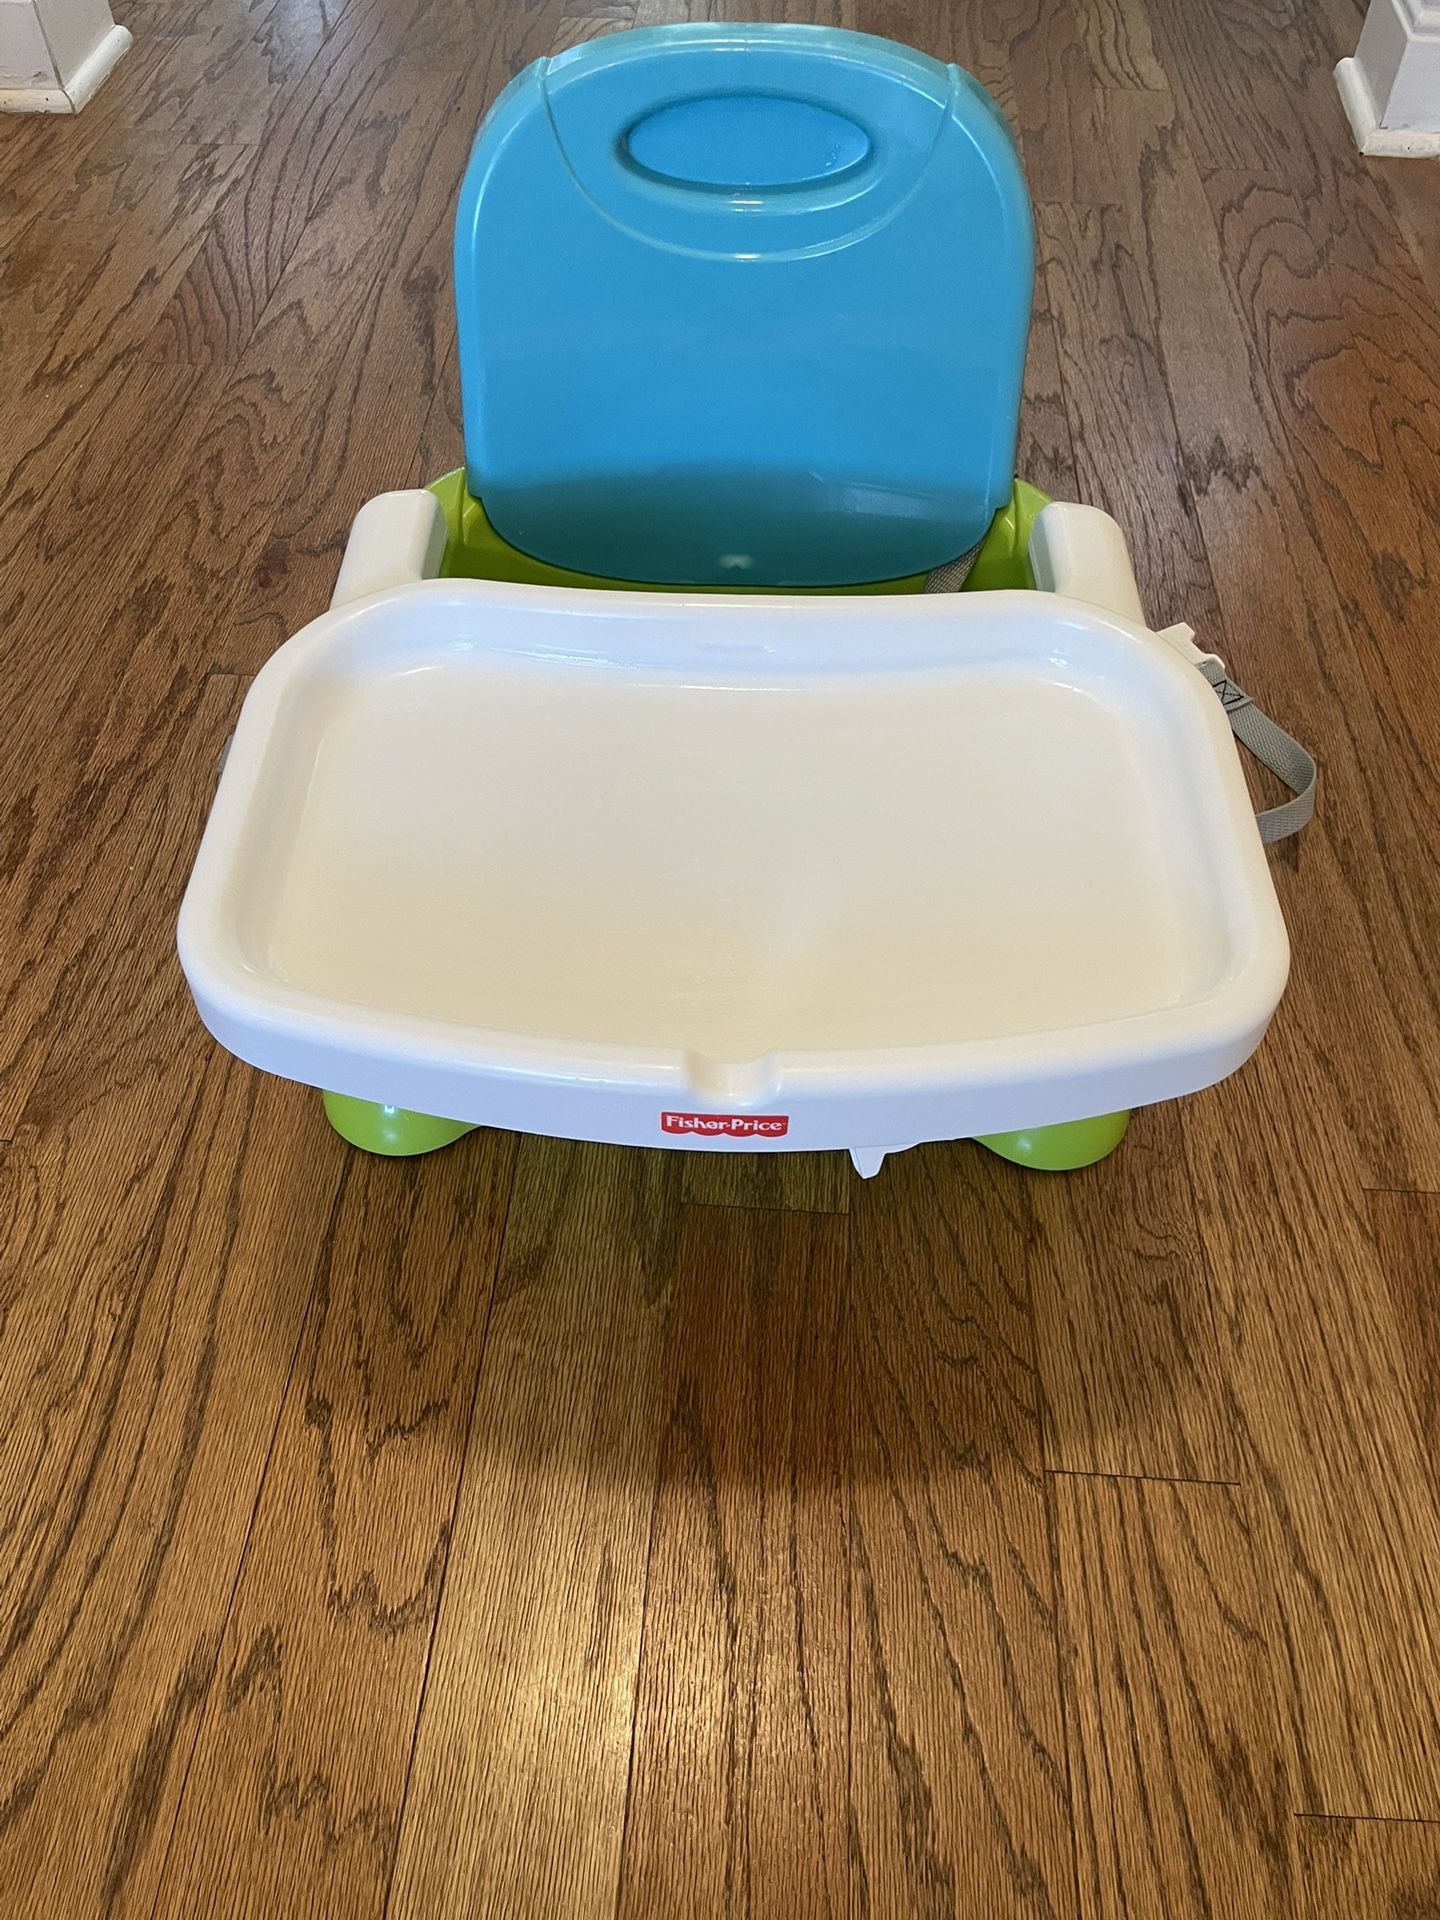 Fisher Price Healthy Care Booster Seat